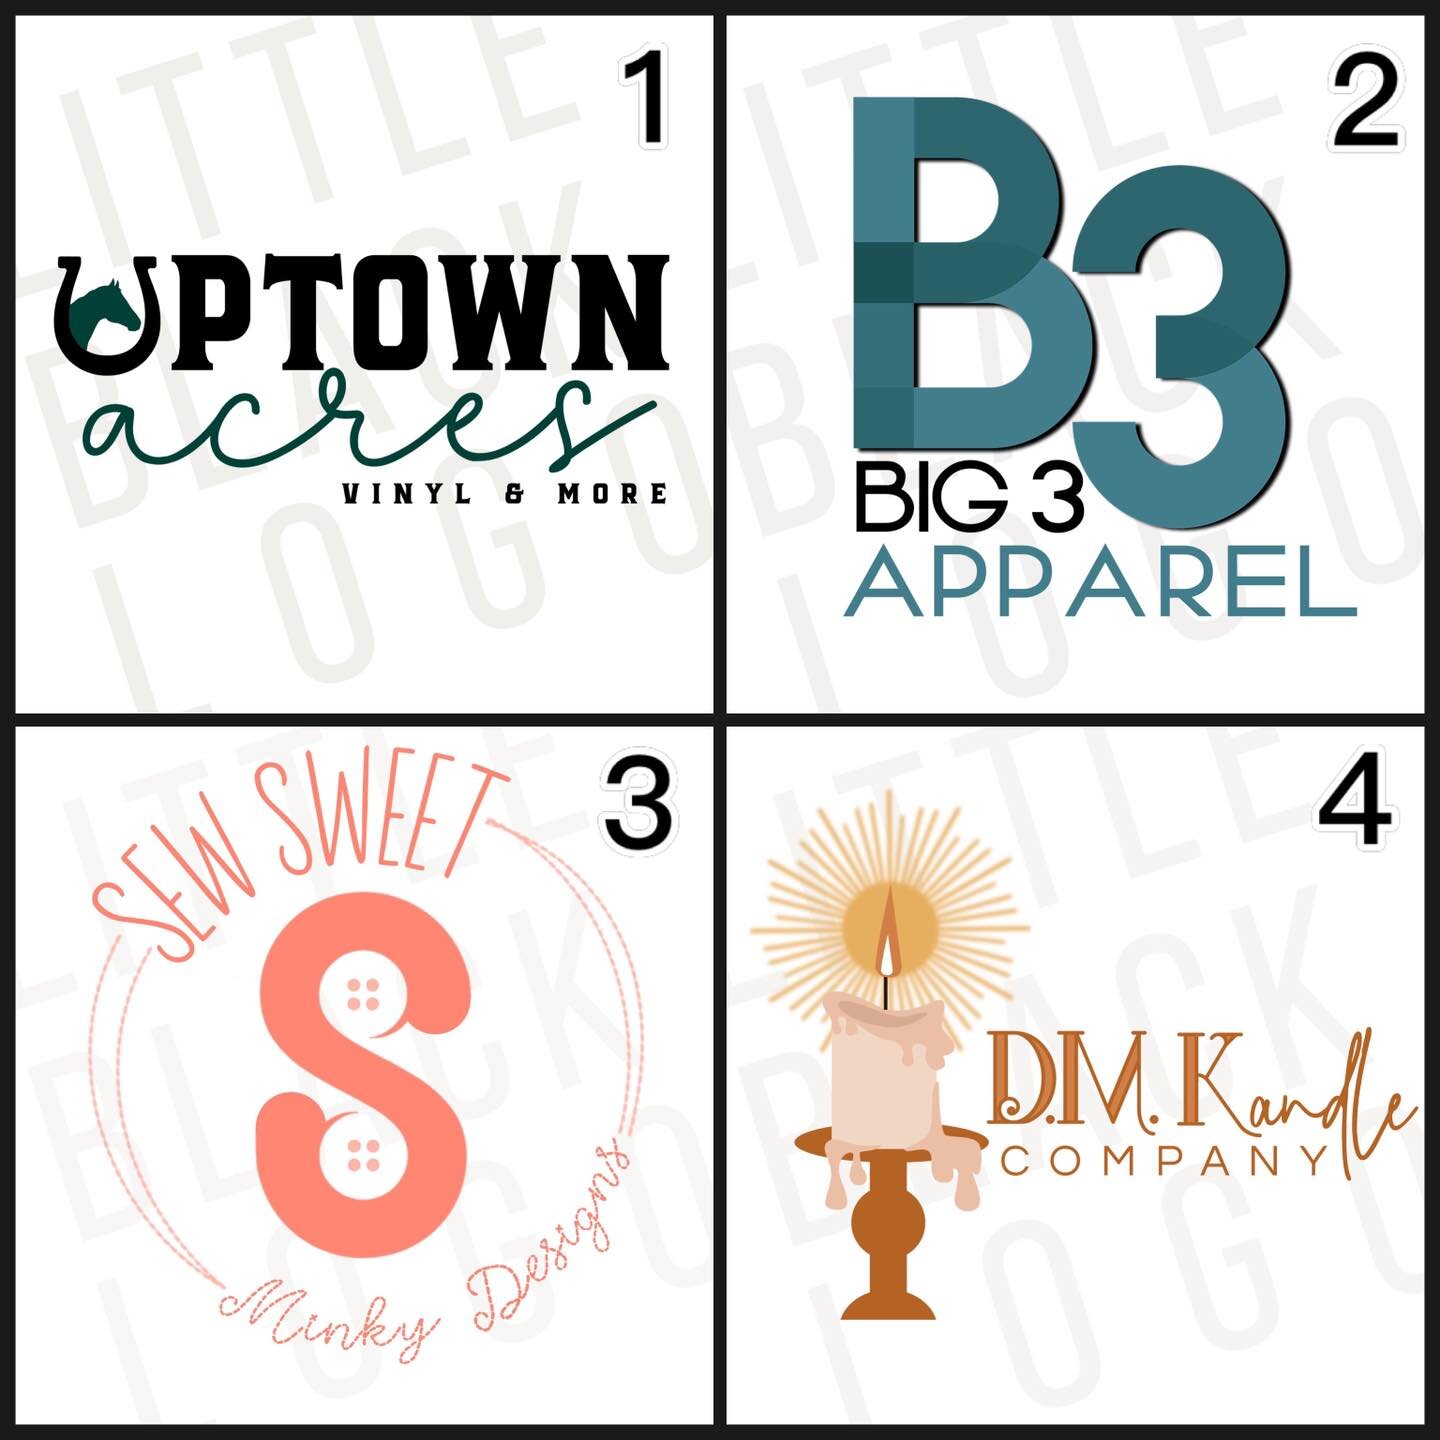 🗳️LET THE VOTING BEGIN! 
 *voting ends on Monday 4/8 at 11:59pm!

Which amazing small business is getting their logo for FREE?! 

1 - Uptown Acres Vinyl
2- BigThree Apparel
3- Sew Sweet Minky Designs
4-D.M. Kandle Co (find them on IG and TikTok!)